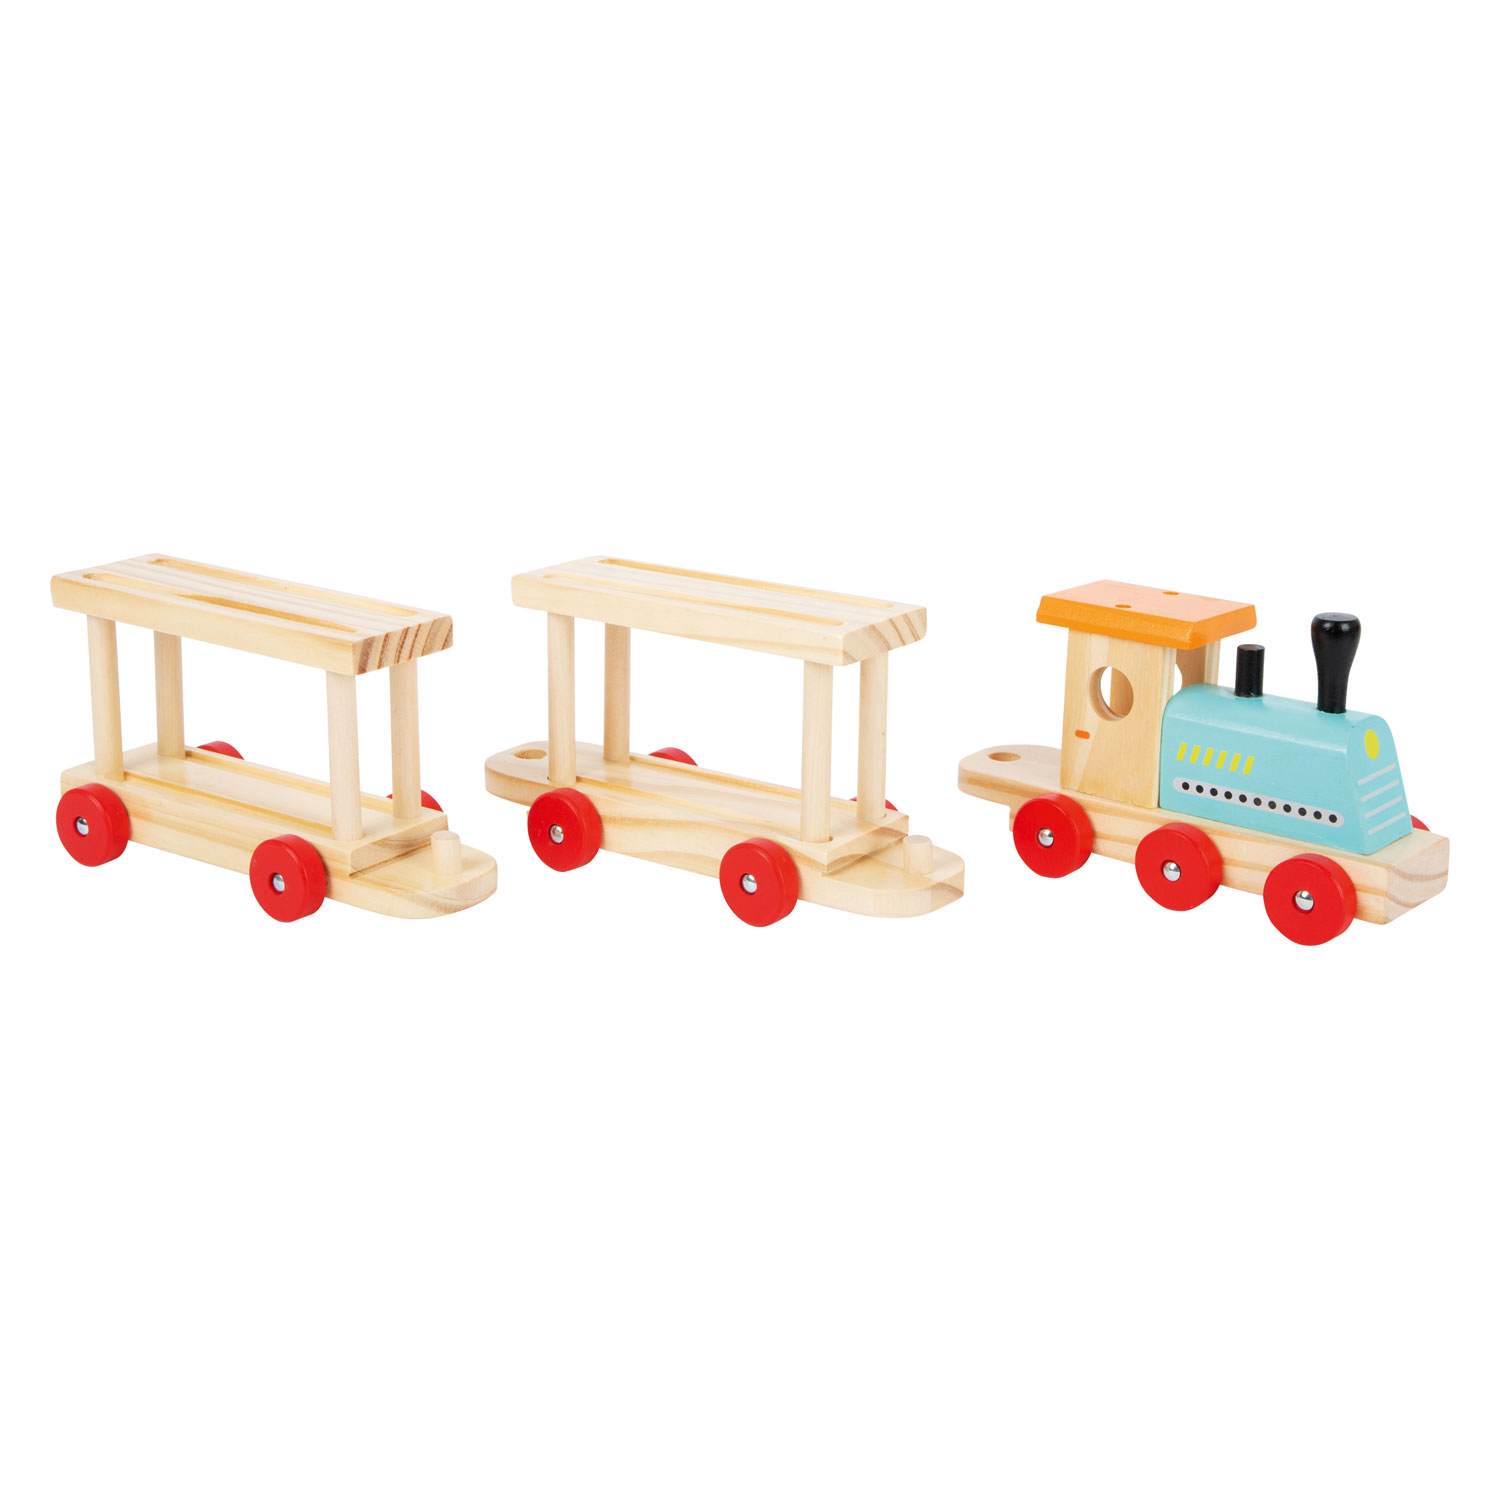 Small Foot - Holztransporter mit Waggons, 11dlg.